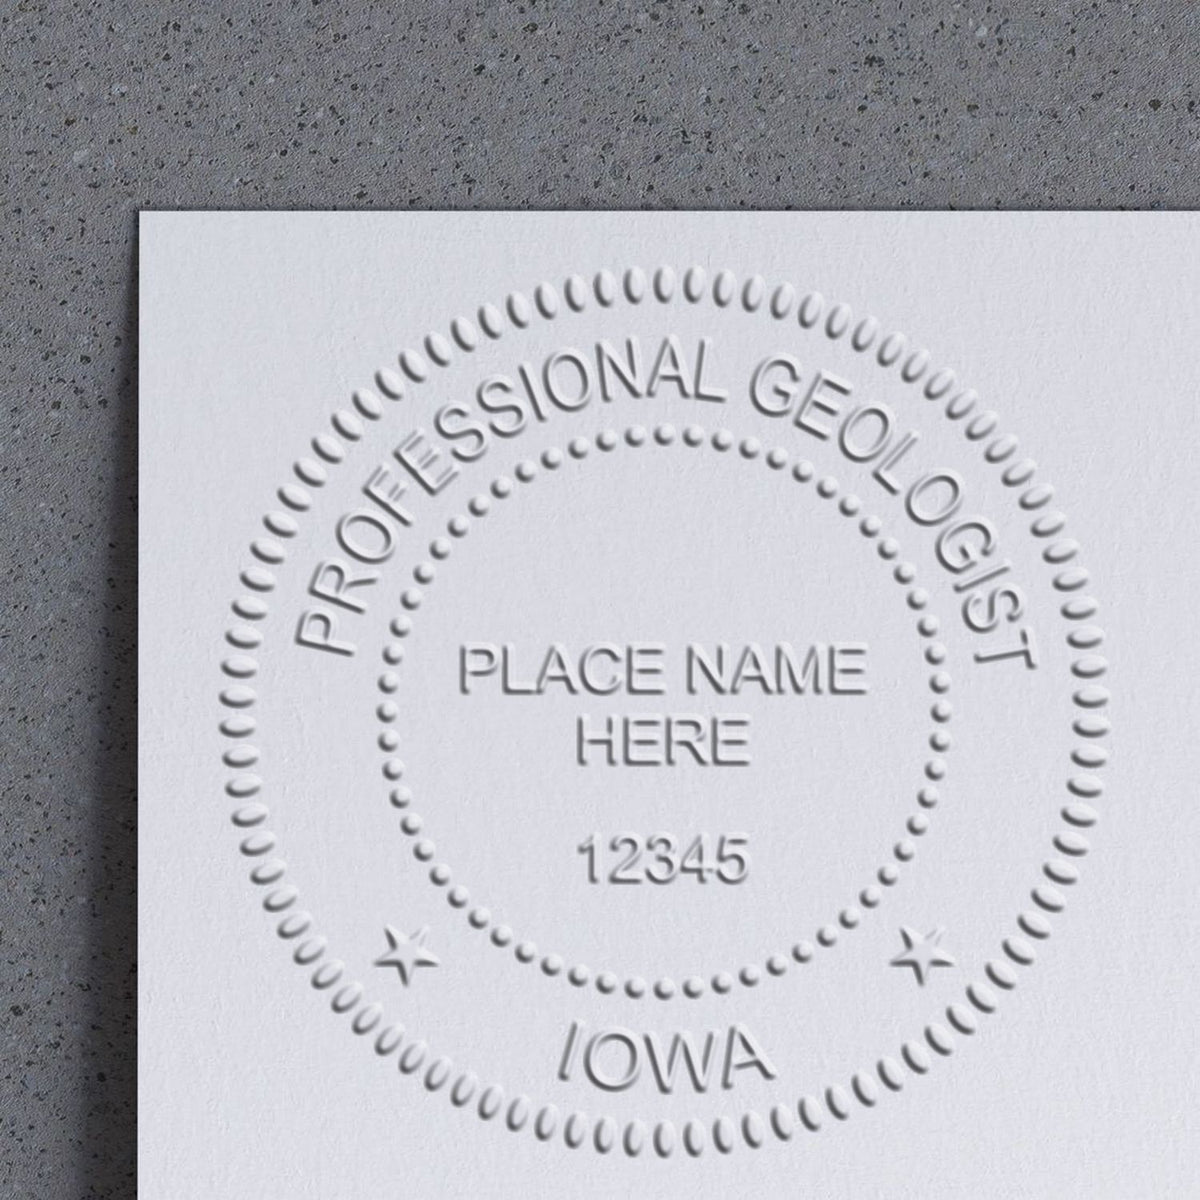 An in use photo of the Hybrid Iowa Geologist Seal showing a sample imprint on a cardstock